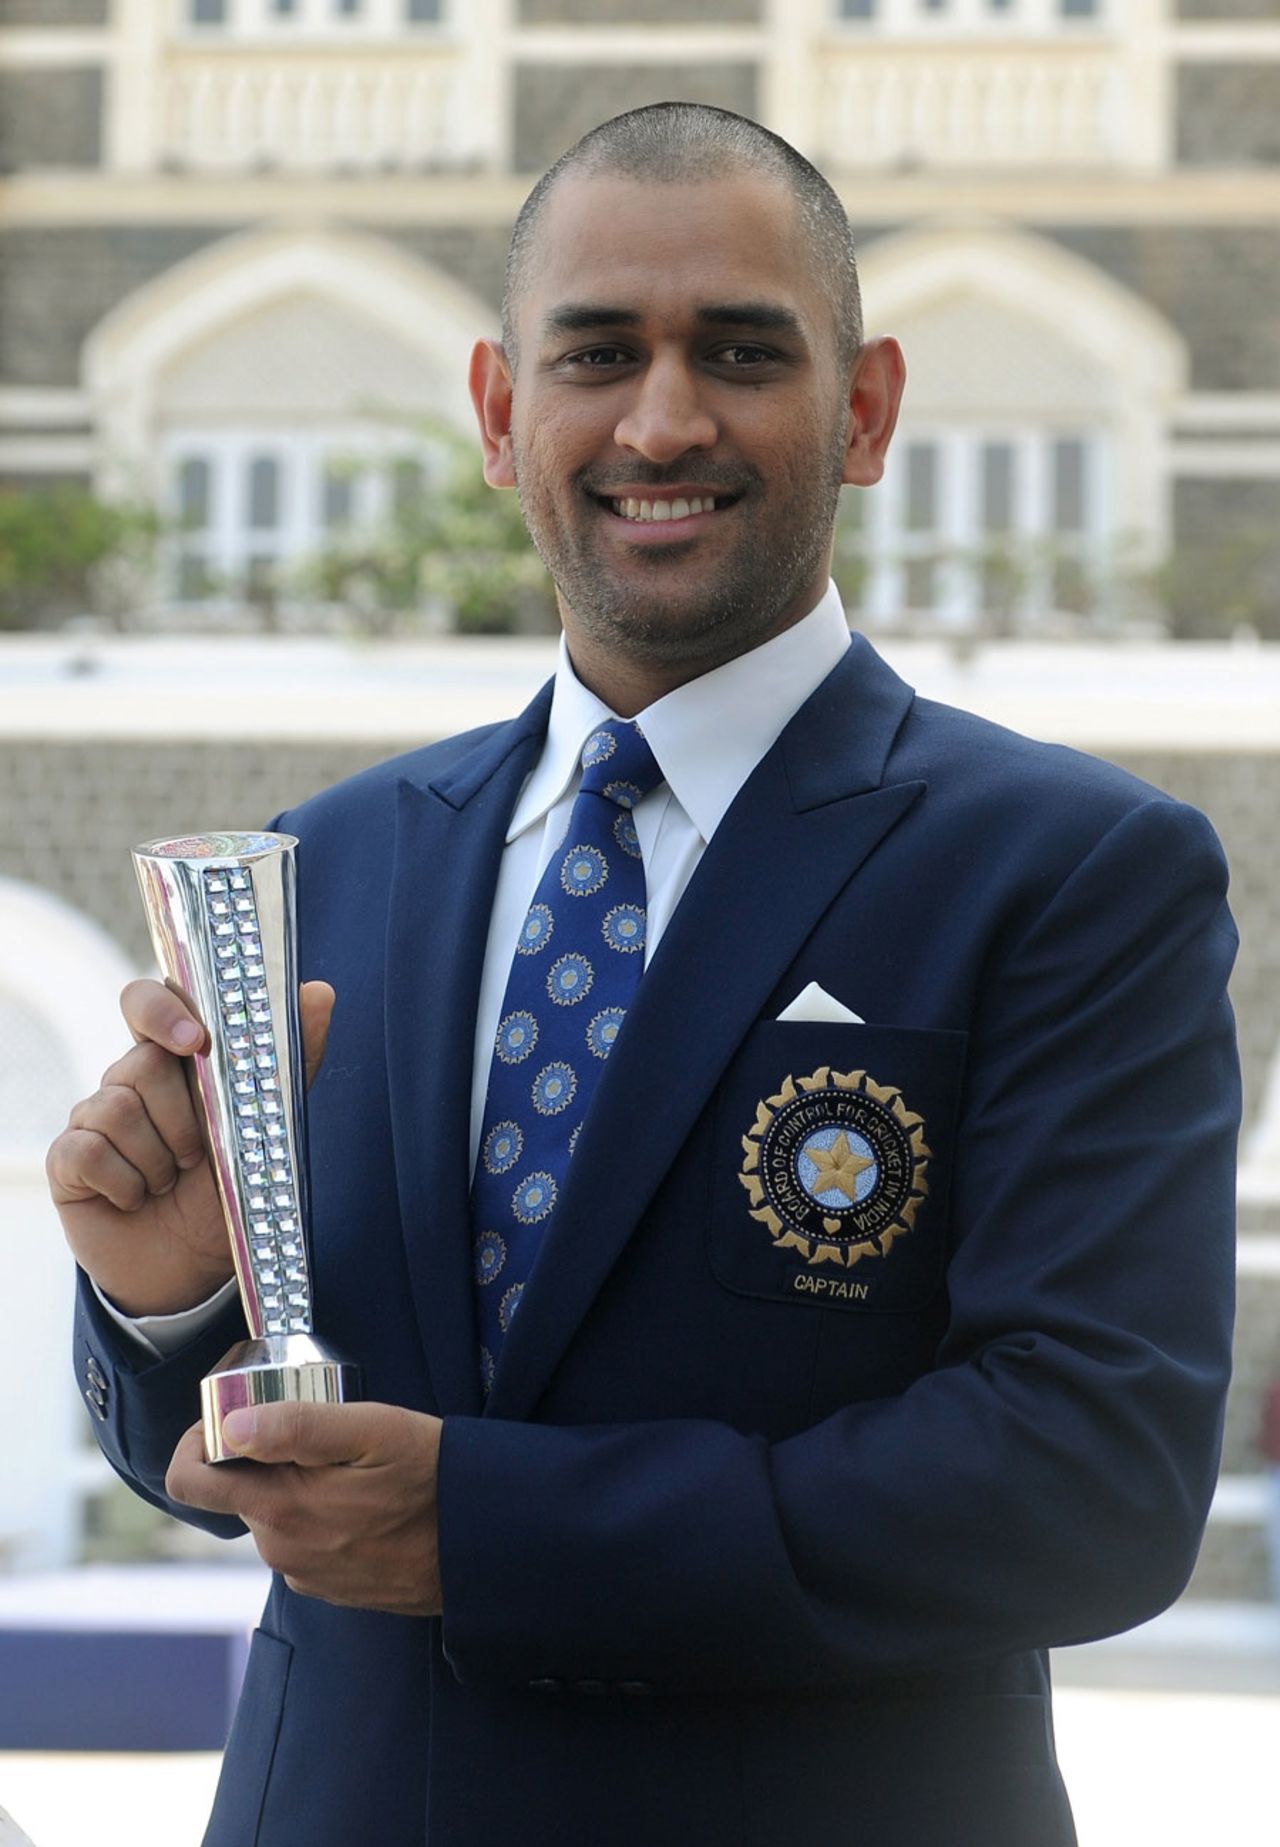 MS Dhoni with the Man-of-the-Match trophy he picked up in the World Cup final, Mumbai, April 3, 2011